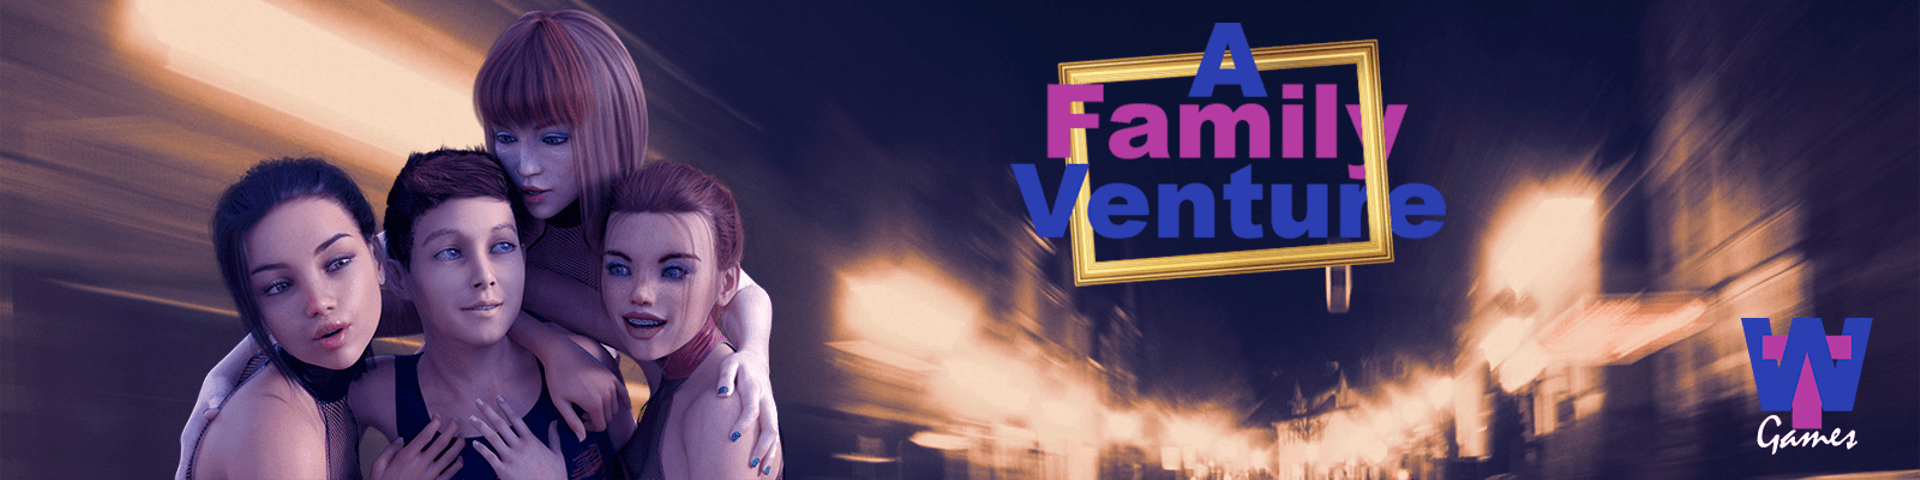 A Family Venture – Version 0.05b - Patreon incest adult game 16